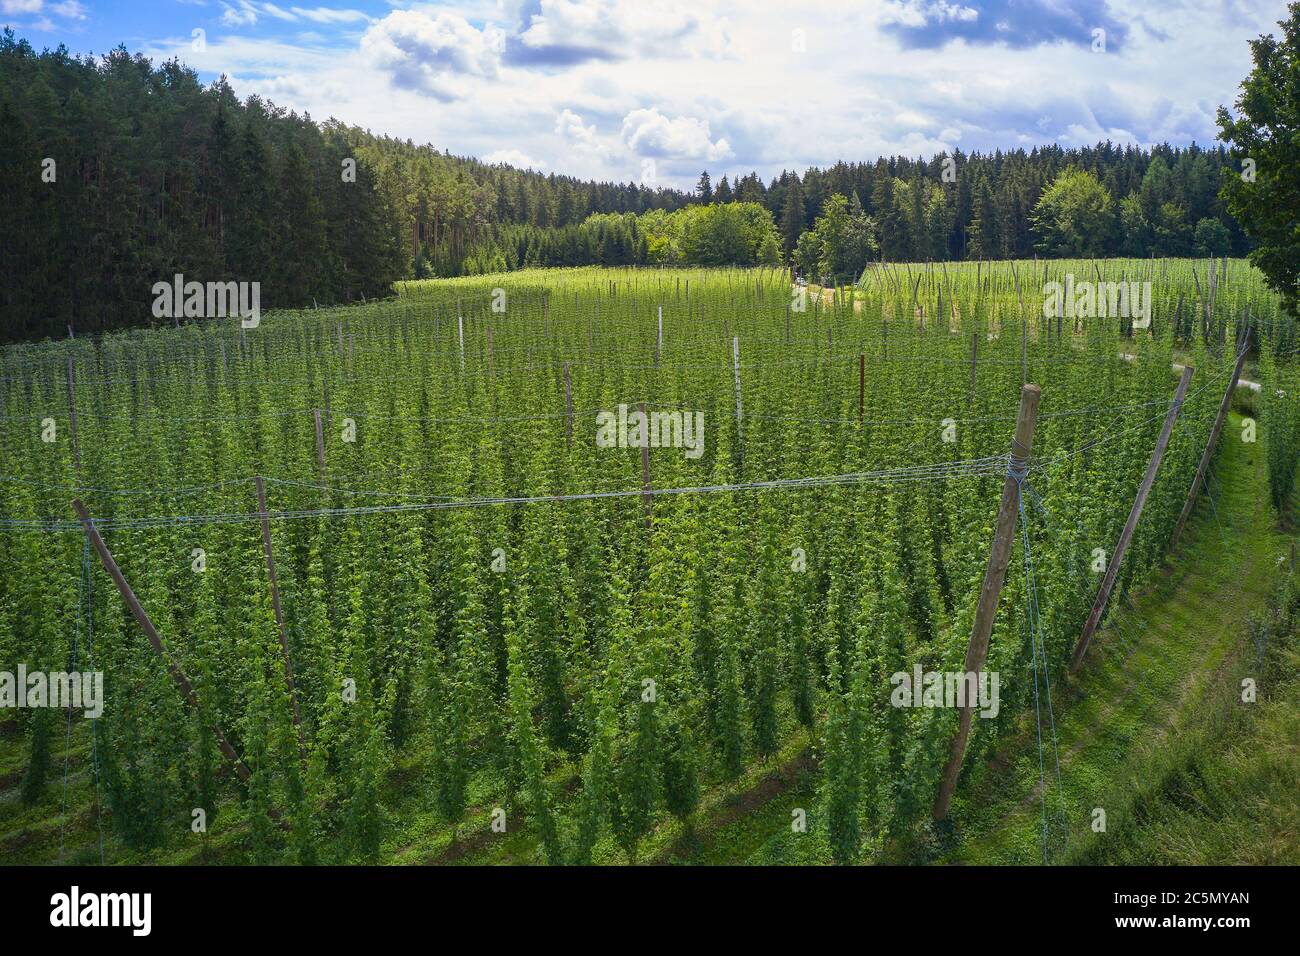 Pfaffenhofen a.d.Ilm, Bavaria,  Germany, July 03, 2020.  Hop cultivation in Pfaffenhofen a.d.Ilm. The district is embedded in the world's largest contiguous hop growing area, the Hallertau. © Peter Schatz / Alamy Stock Photos Stock Photo